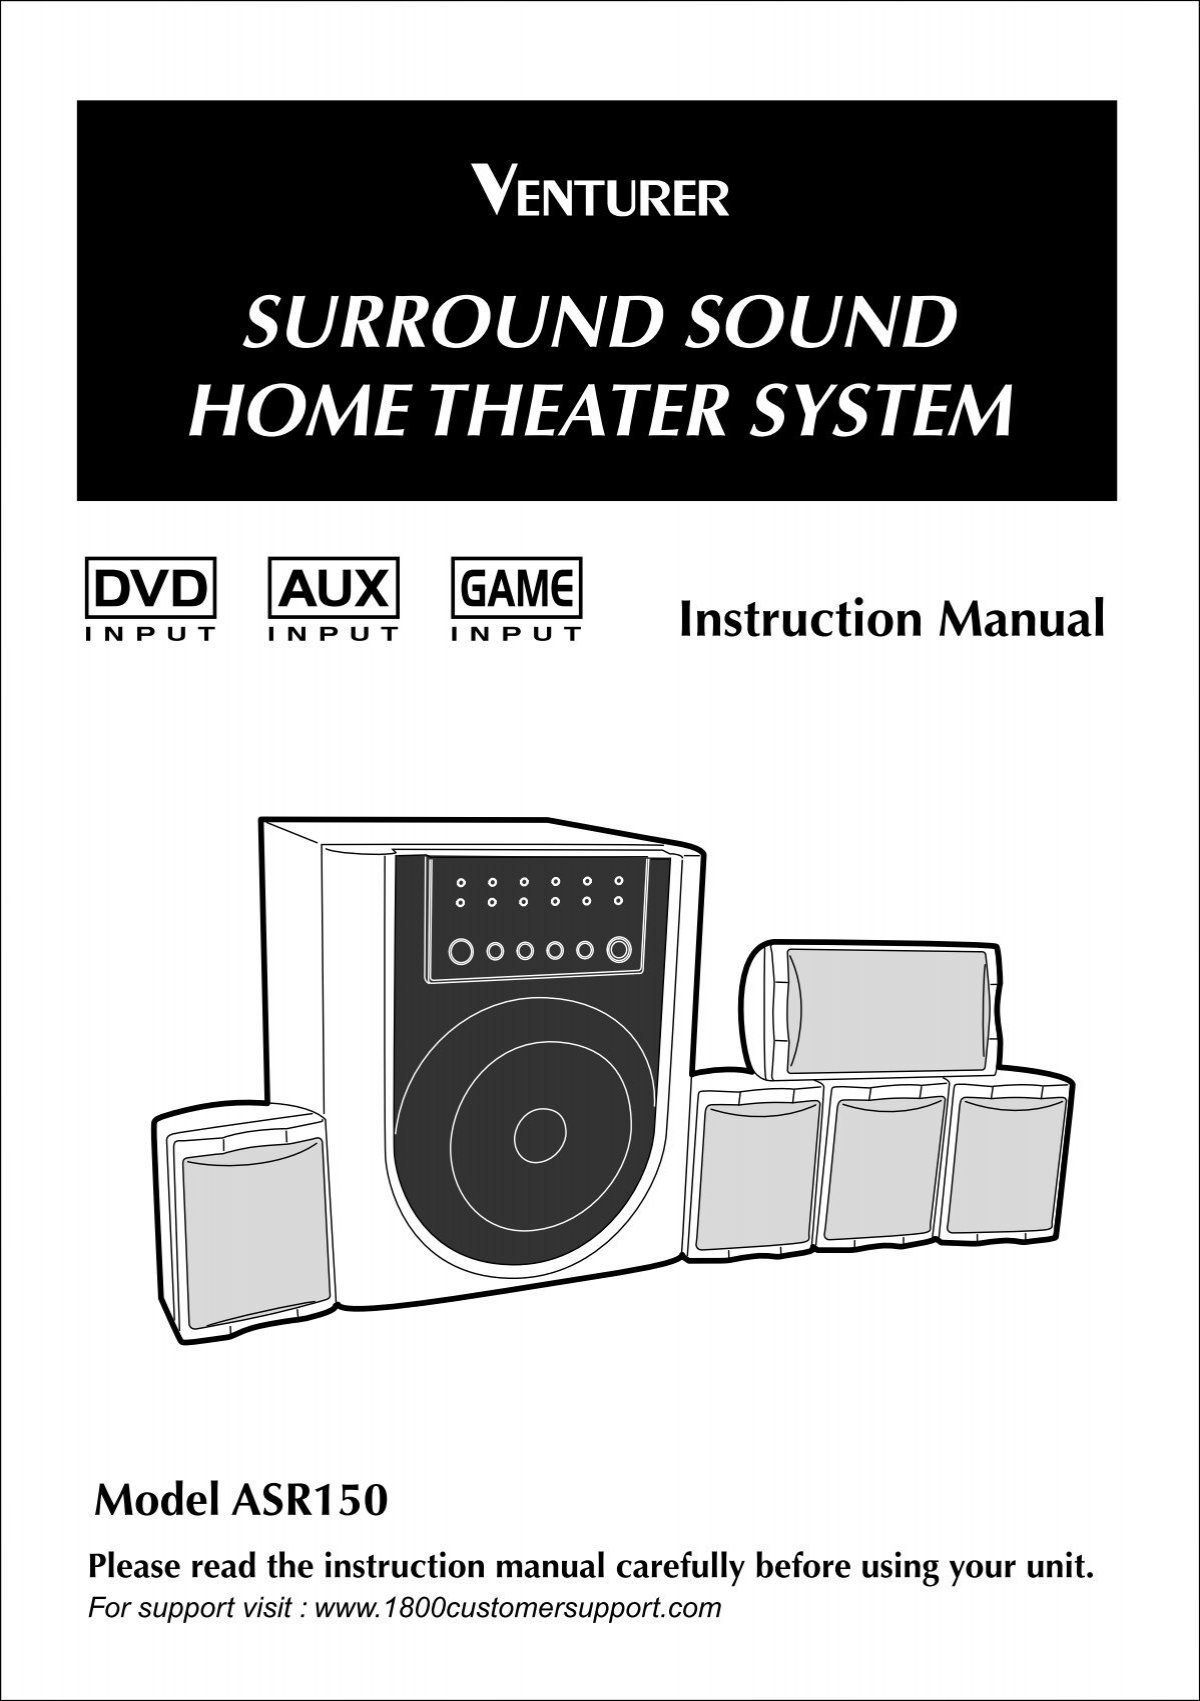 Home  Game Sound Solutions